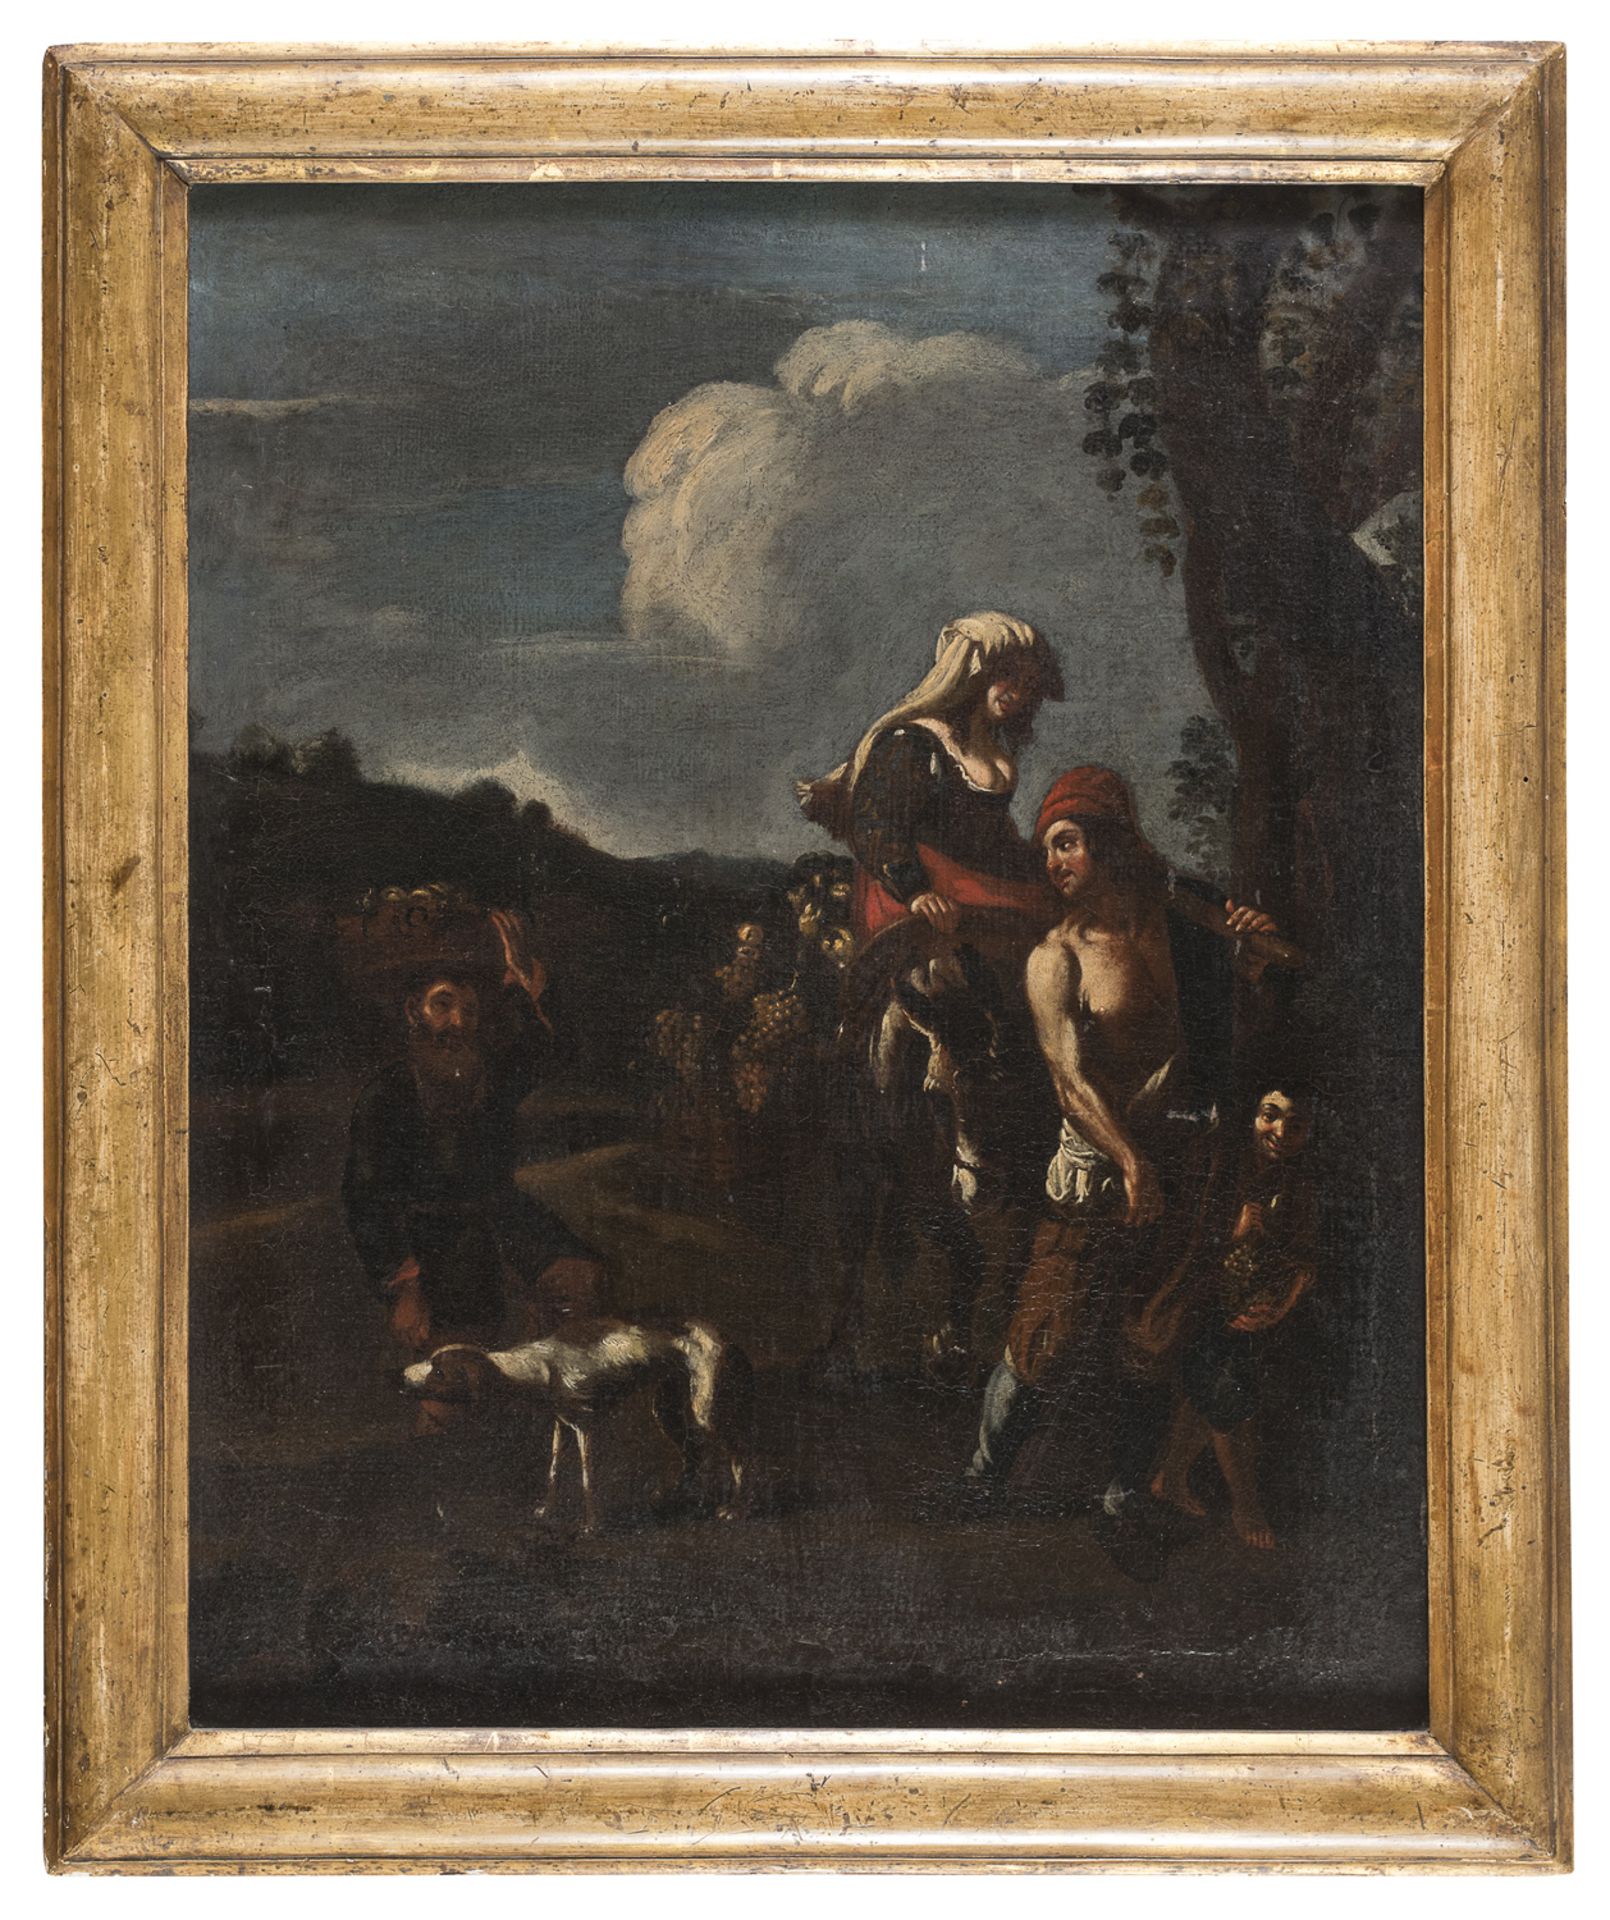 OIL PAINTING OF HARVEST OR AUTUMN 17TH CENTURY